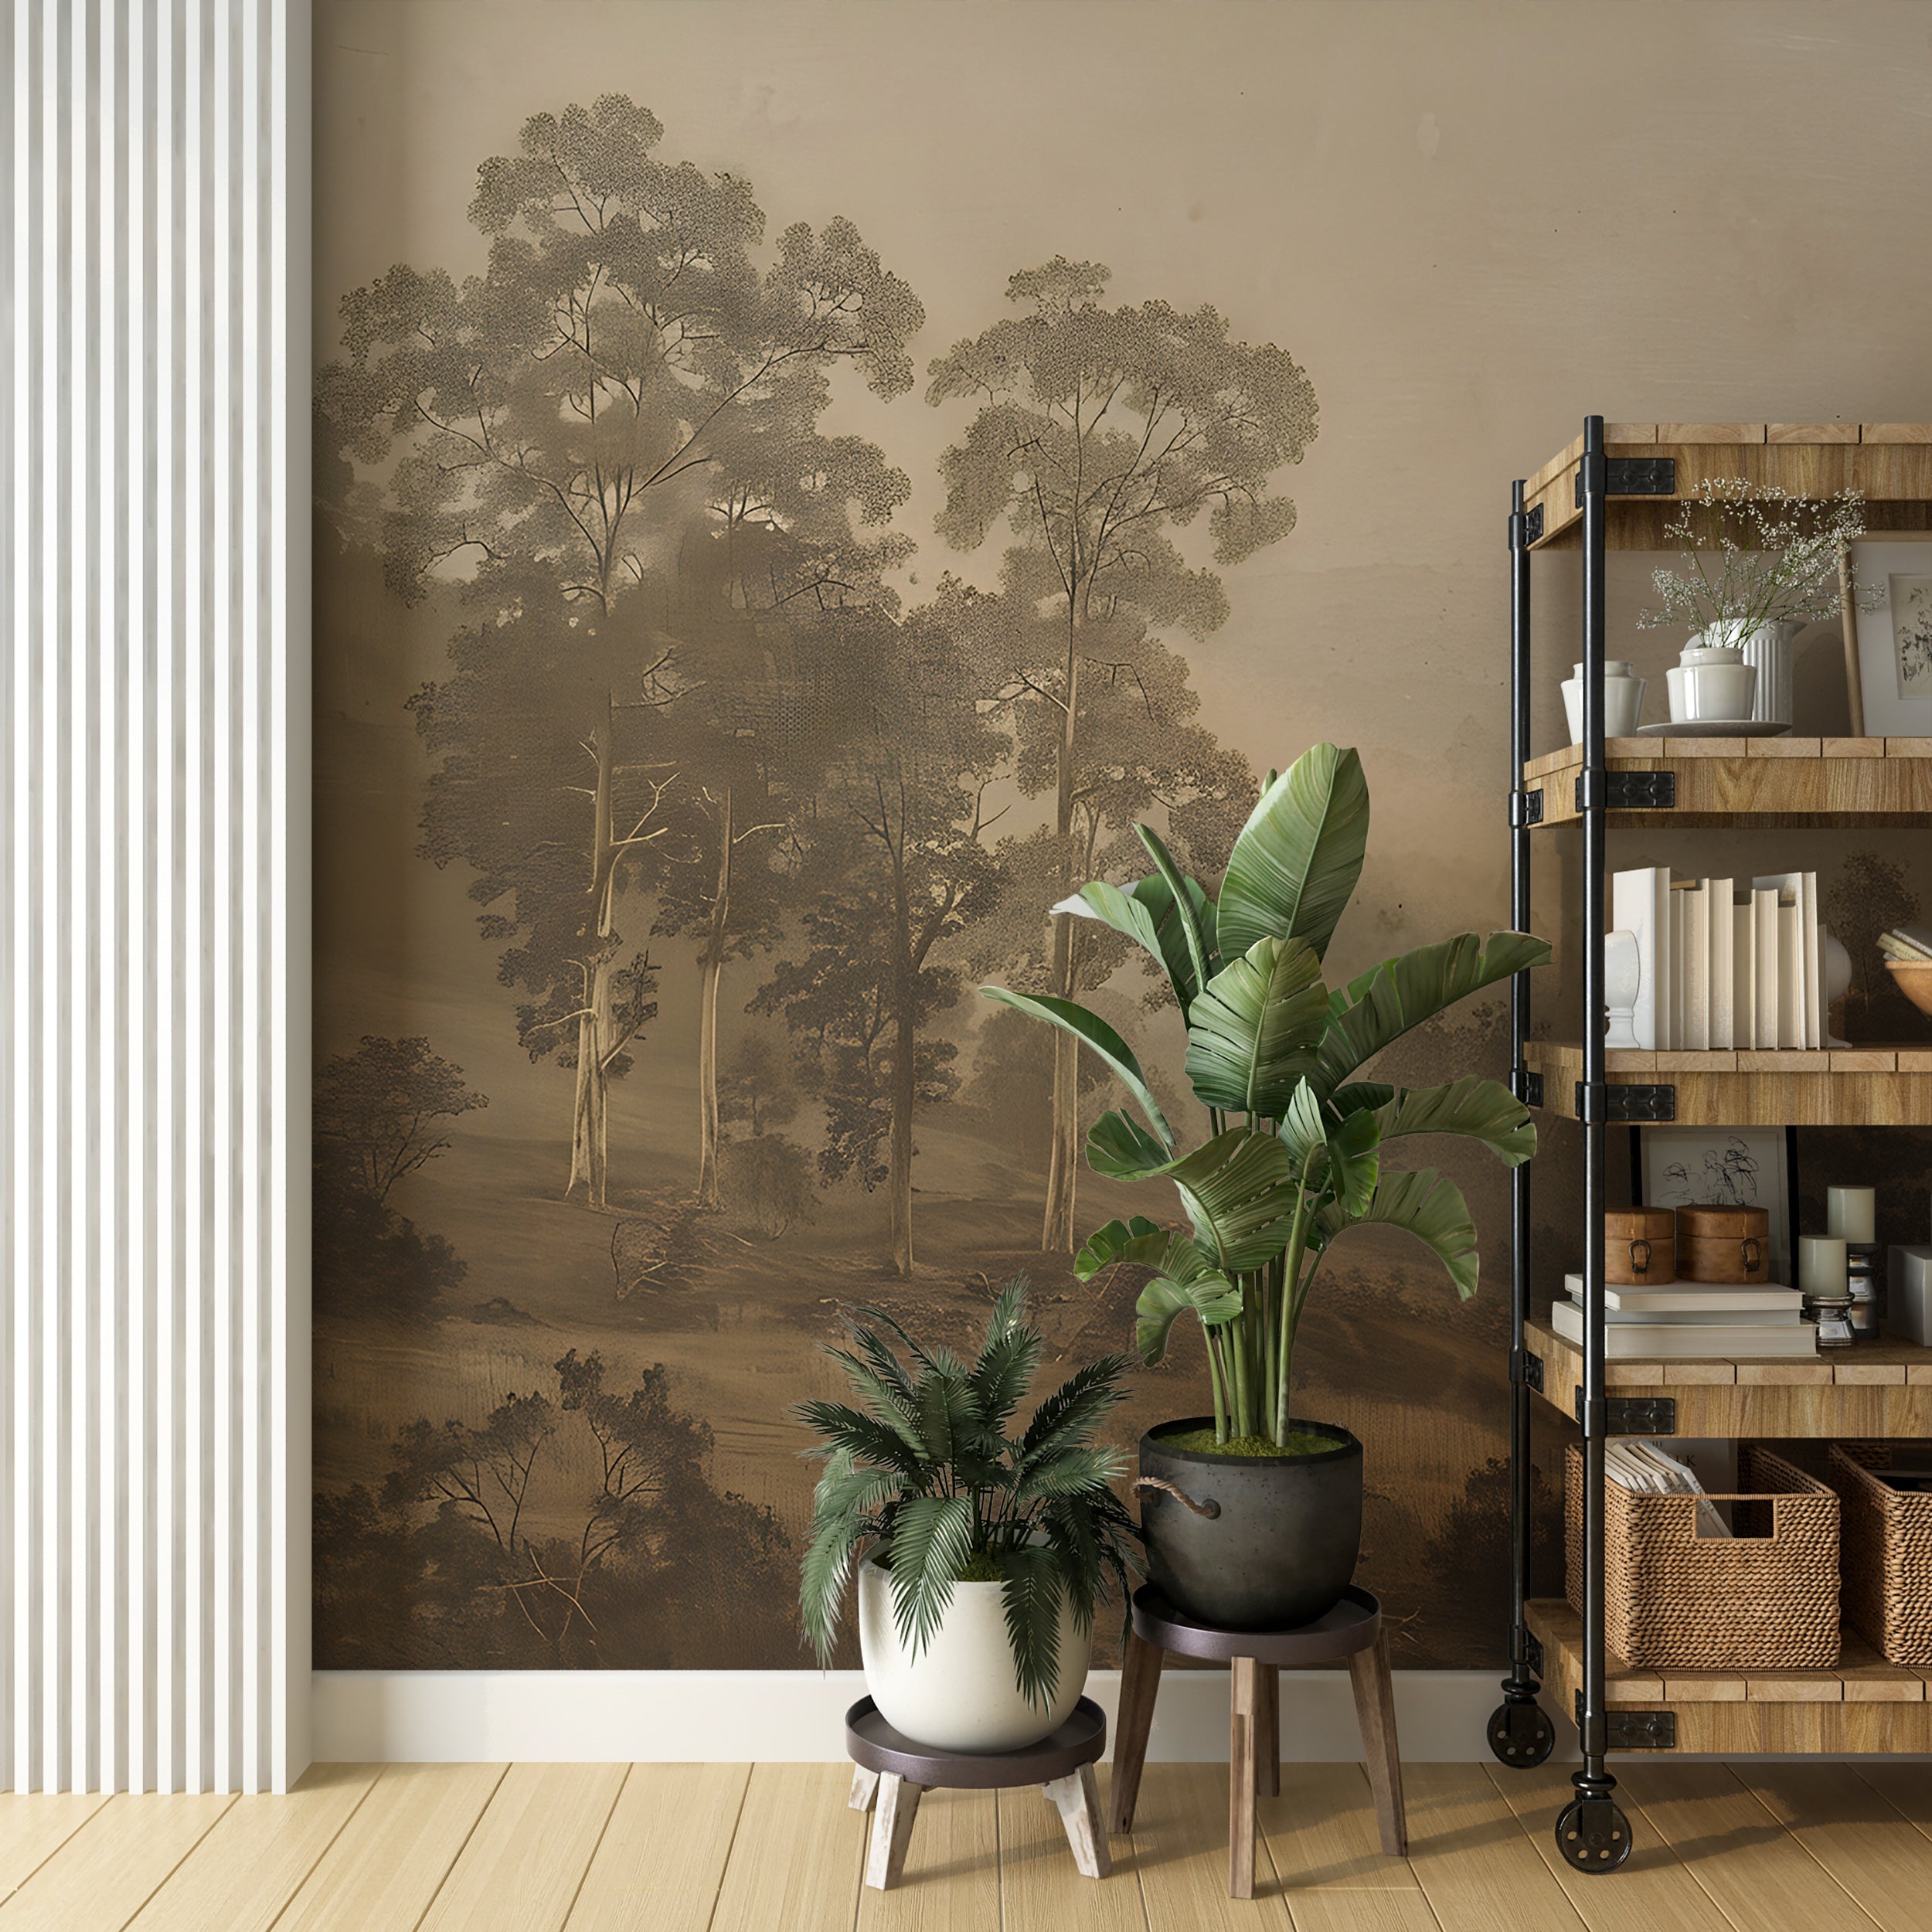 Peel and stick vintage trees mural Sepia nature wallpaper